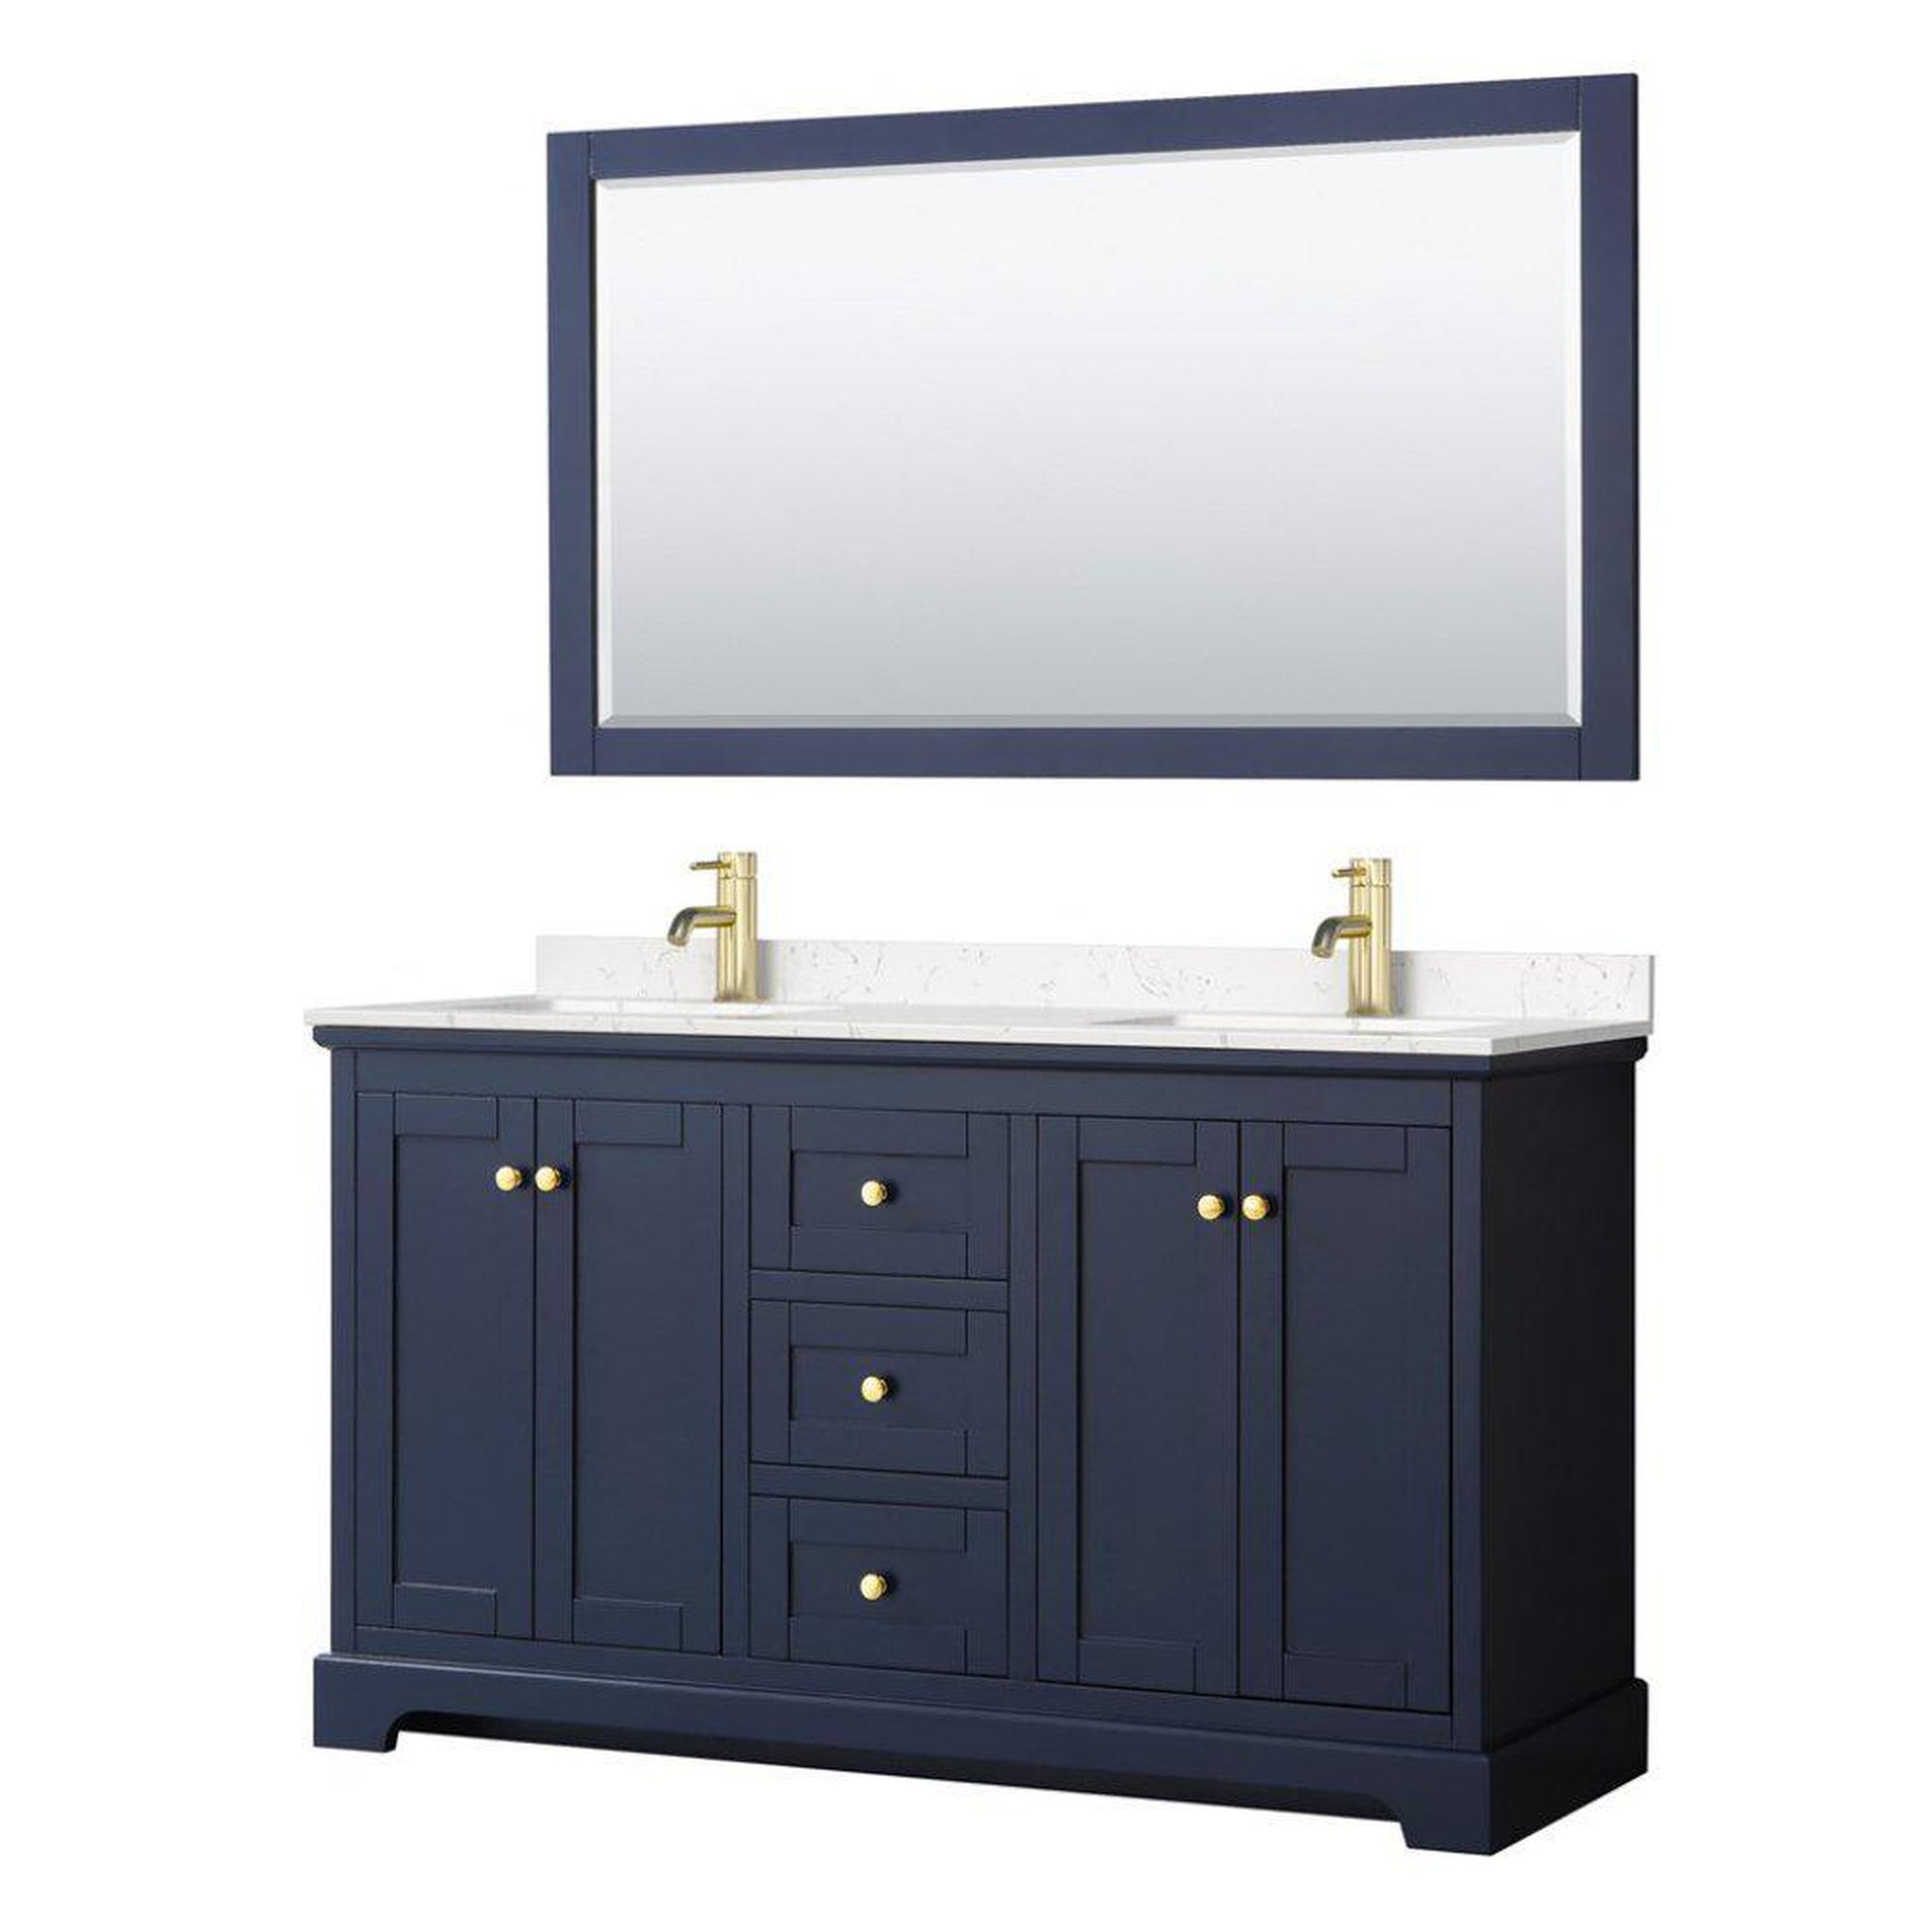 Wyndham Collection Avery 60" Dark Blue Double Bathroom Vanity Set With Light-Vein Cultured Marble Countertop With 1-Hole Faucet And Square Sink And 58" Mirror